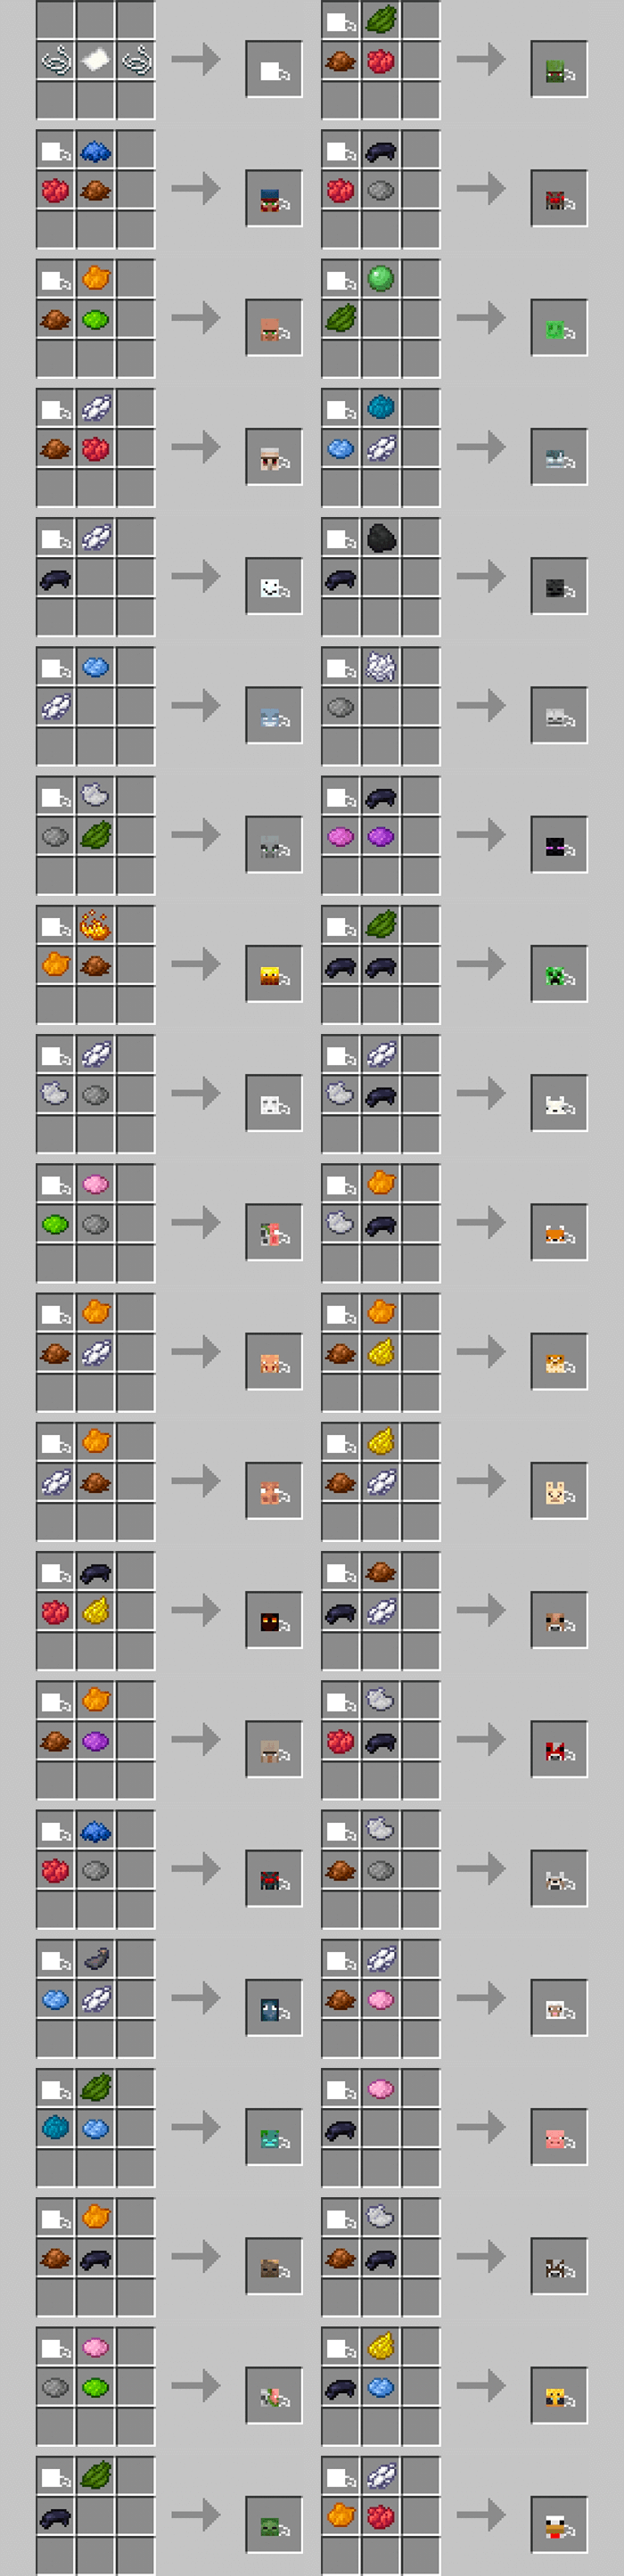 Mask Crafting Recipes from the Mob Disguises mod